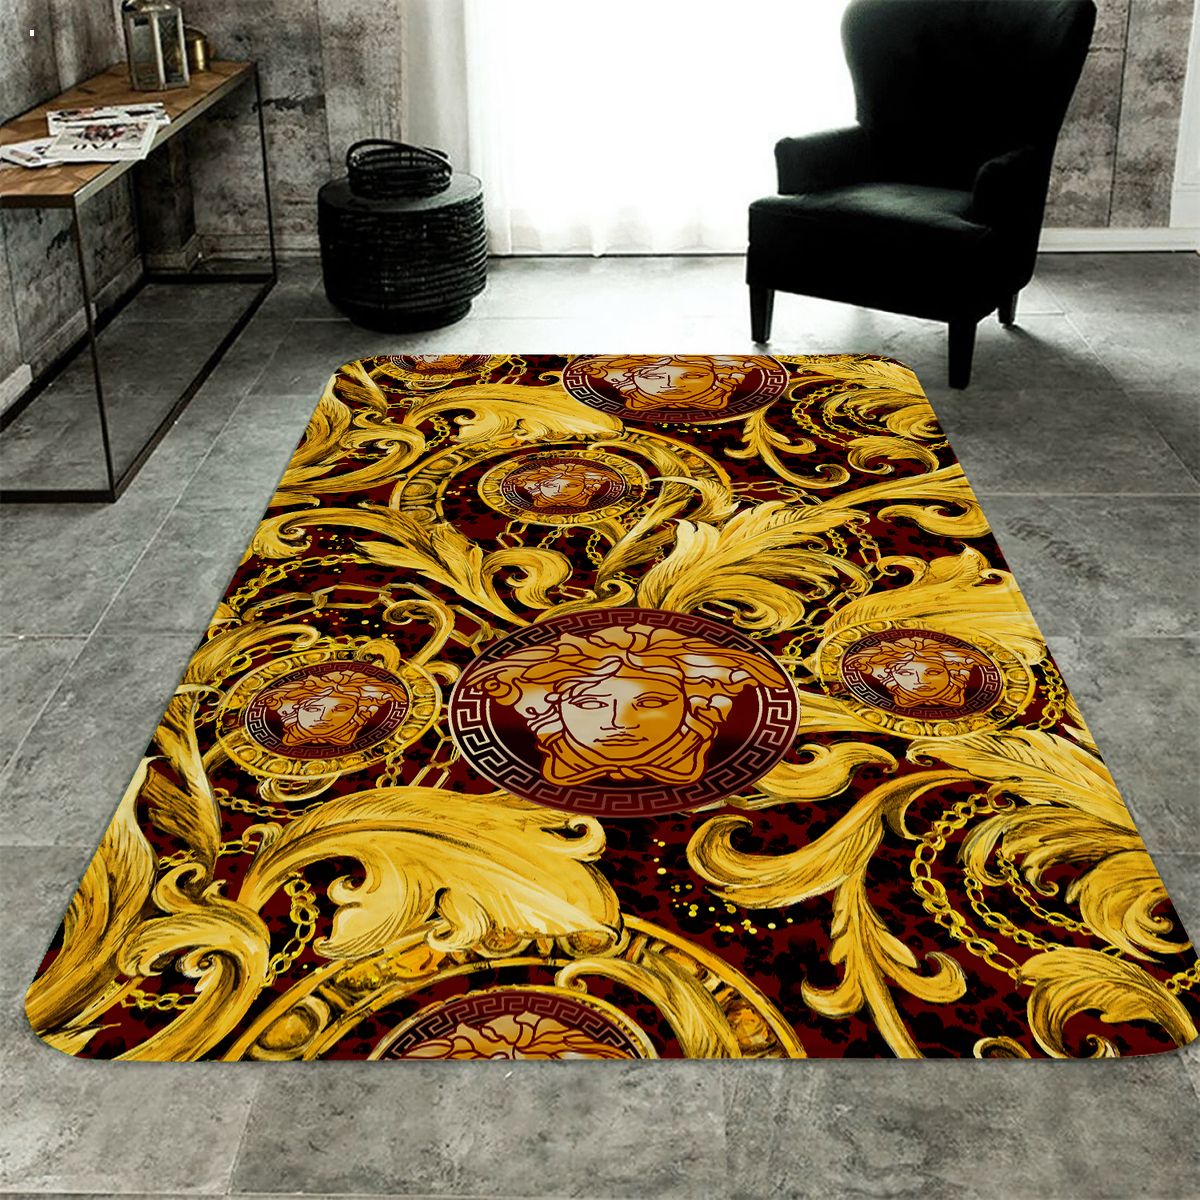 Versace Gold Color Luxury Brand Carpet Rug Limited Edition